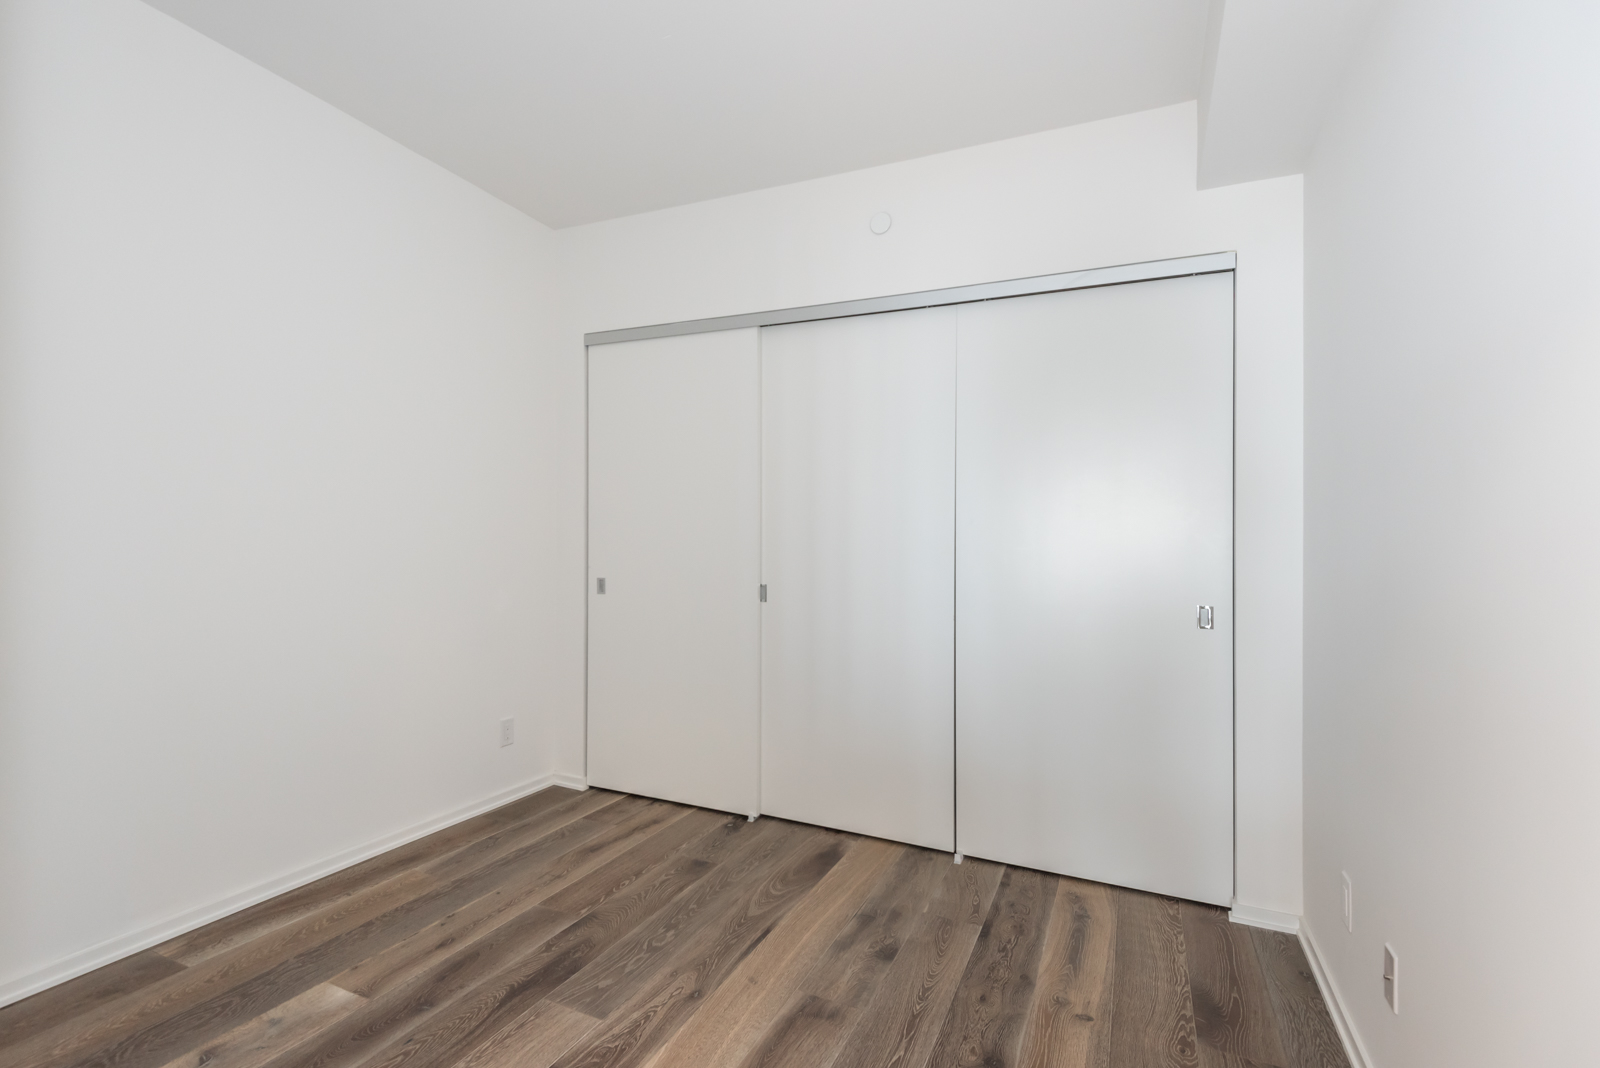 Photo of 2nd bedroom showing large closet doors.